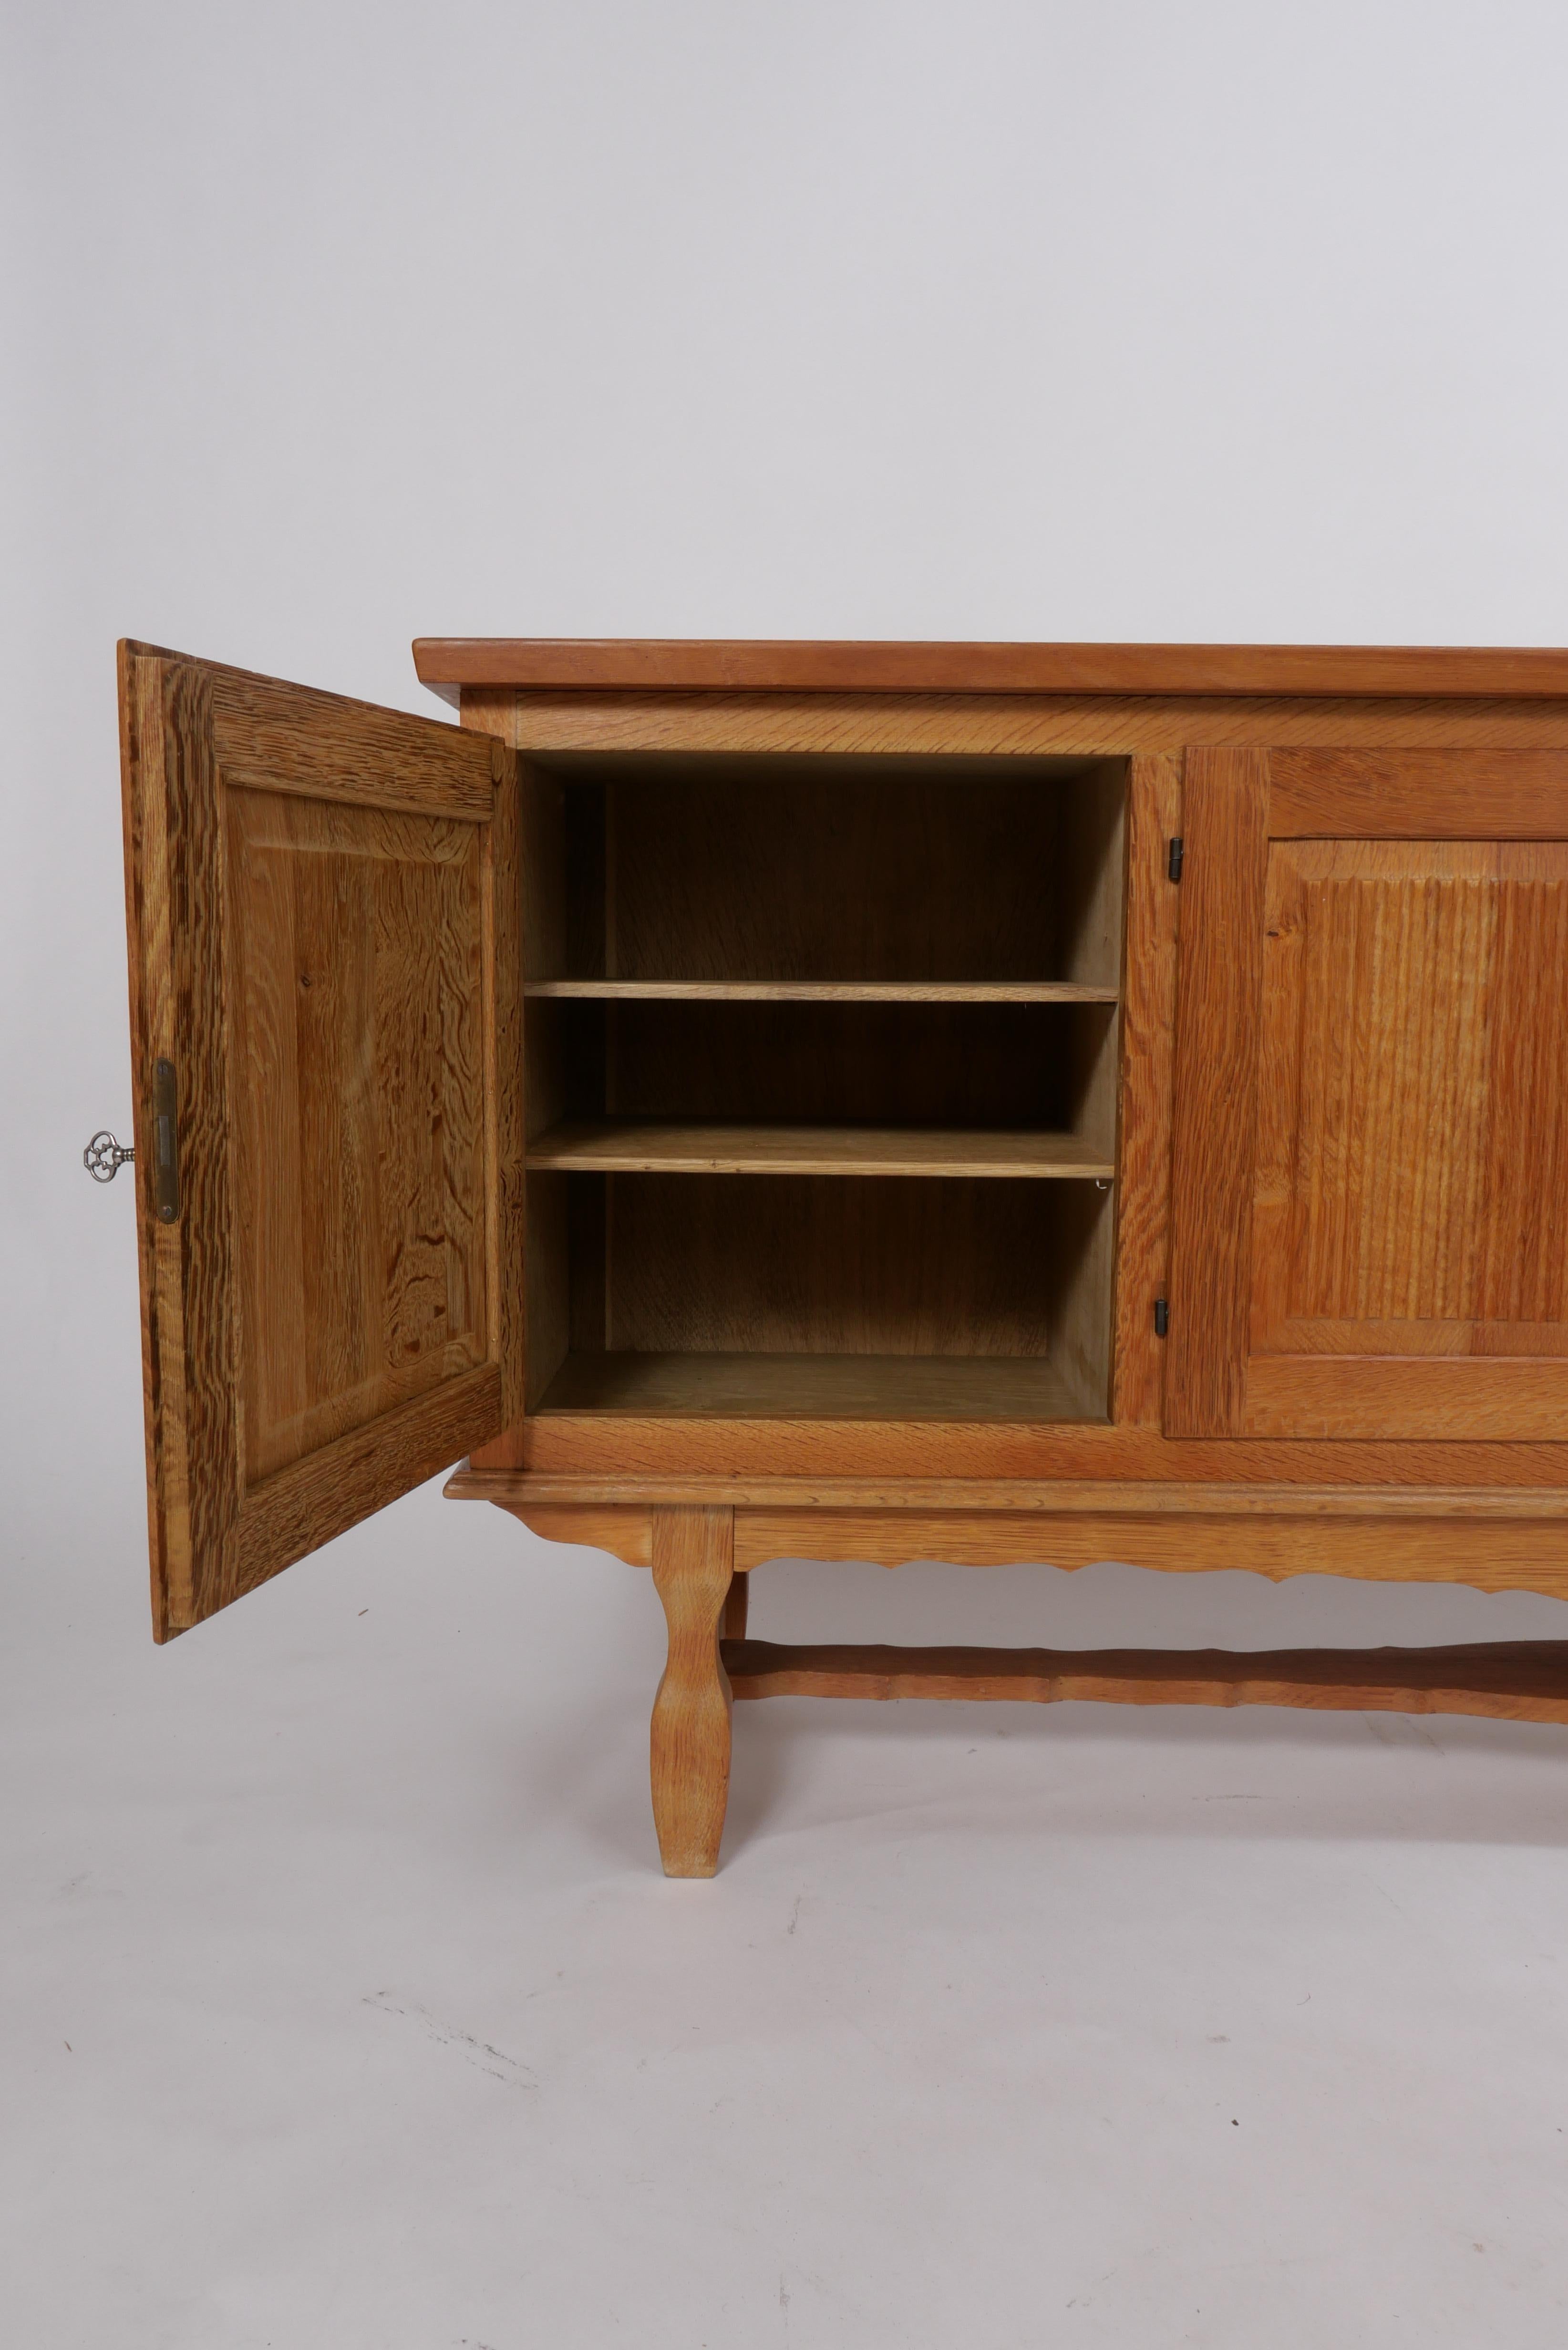 Solid carved oak buffet or sideboard from Denmark circa 1960s-70s. Recently imported and in fantastic condition with age-appropriate character and beautiful construction. Locking doors reveal adjustable shelving and drawers inside lined in felt for